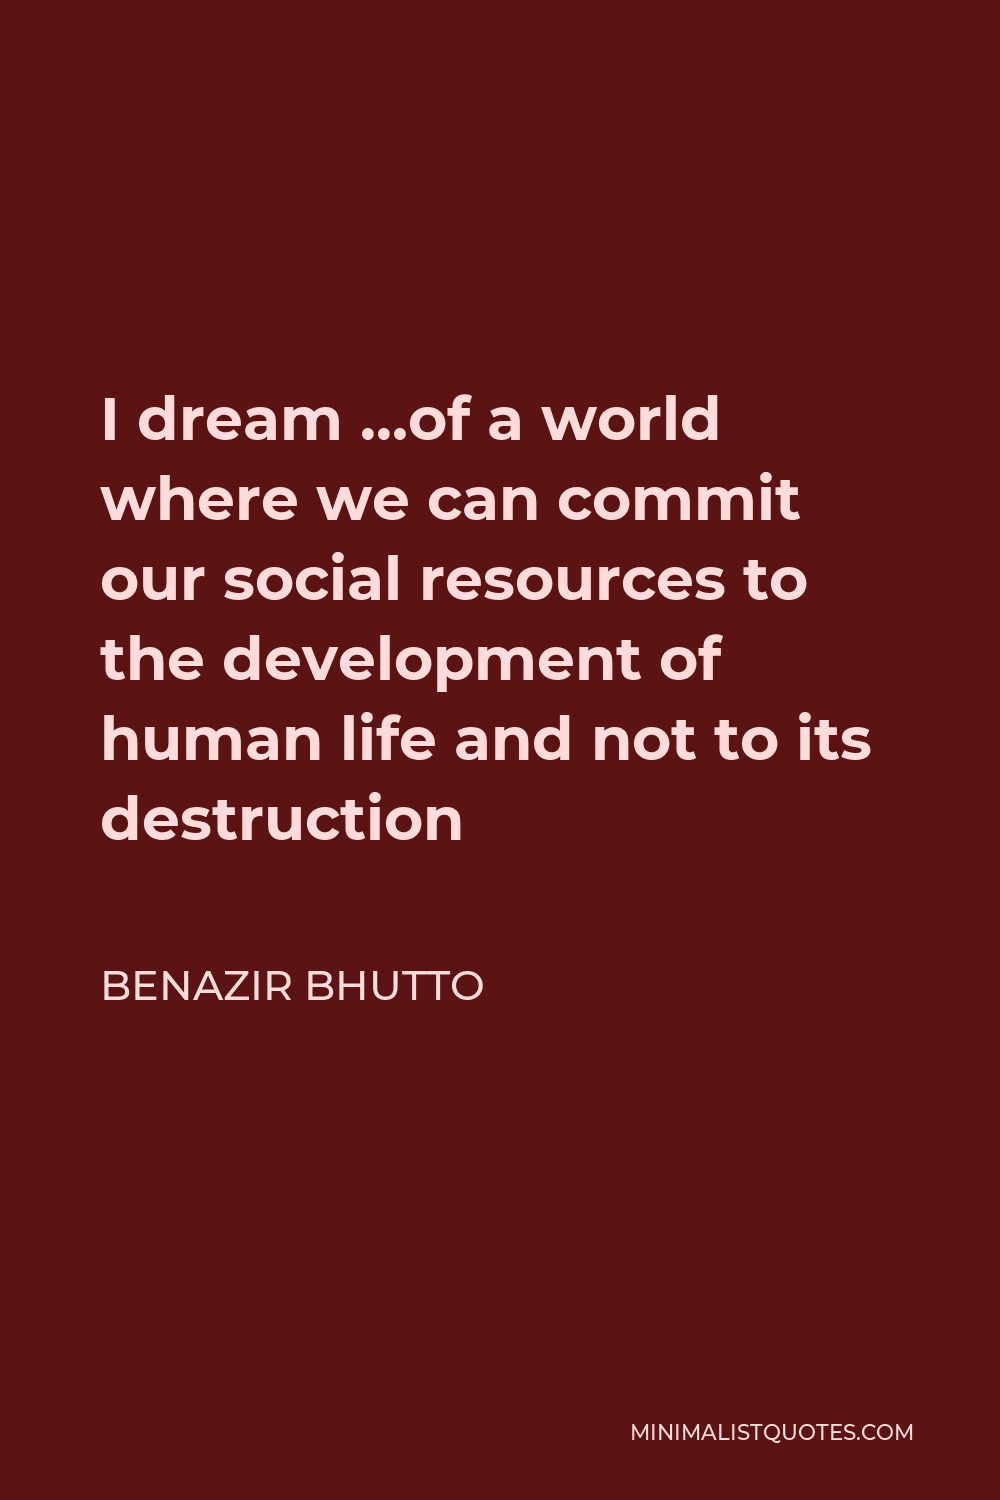 Benazir Bhutto Quote - I dream …of a world where we can commit our social resources to the development of human life and not to its destruction